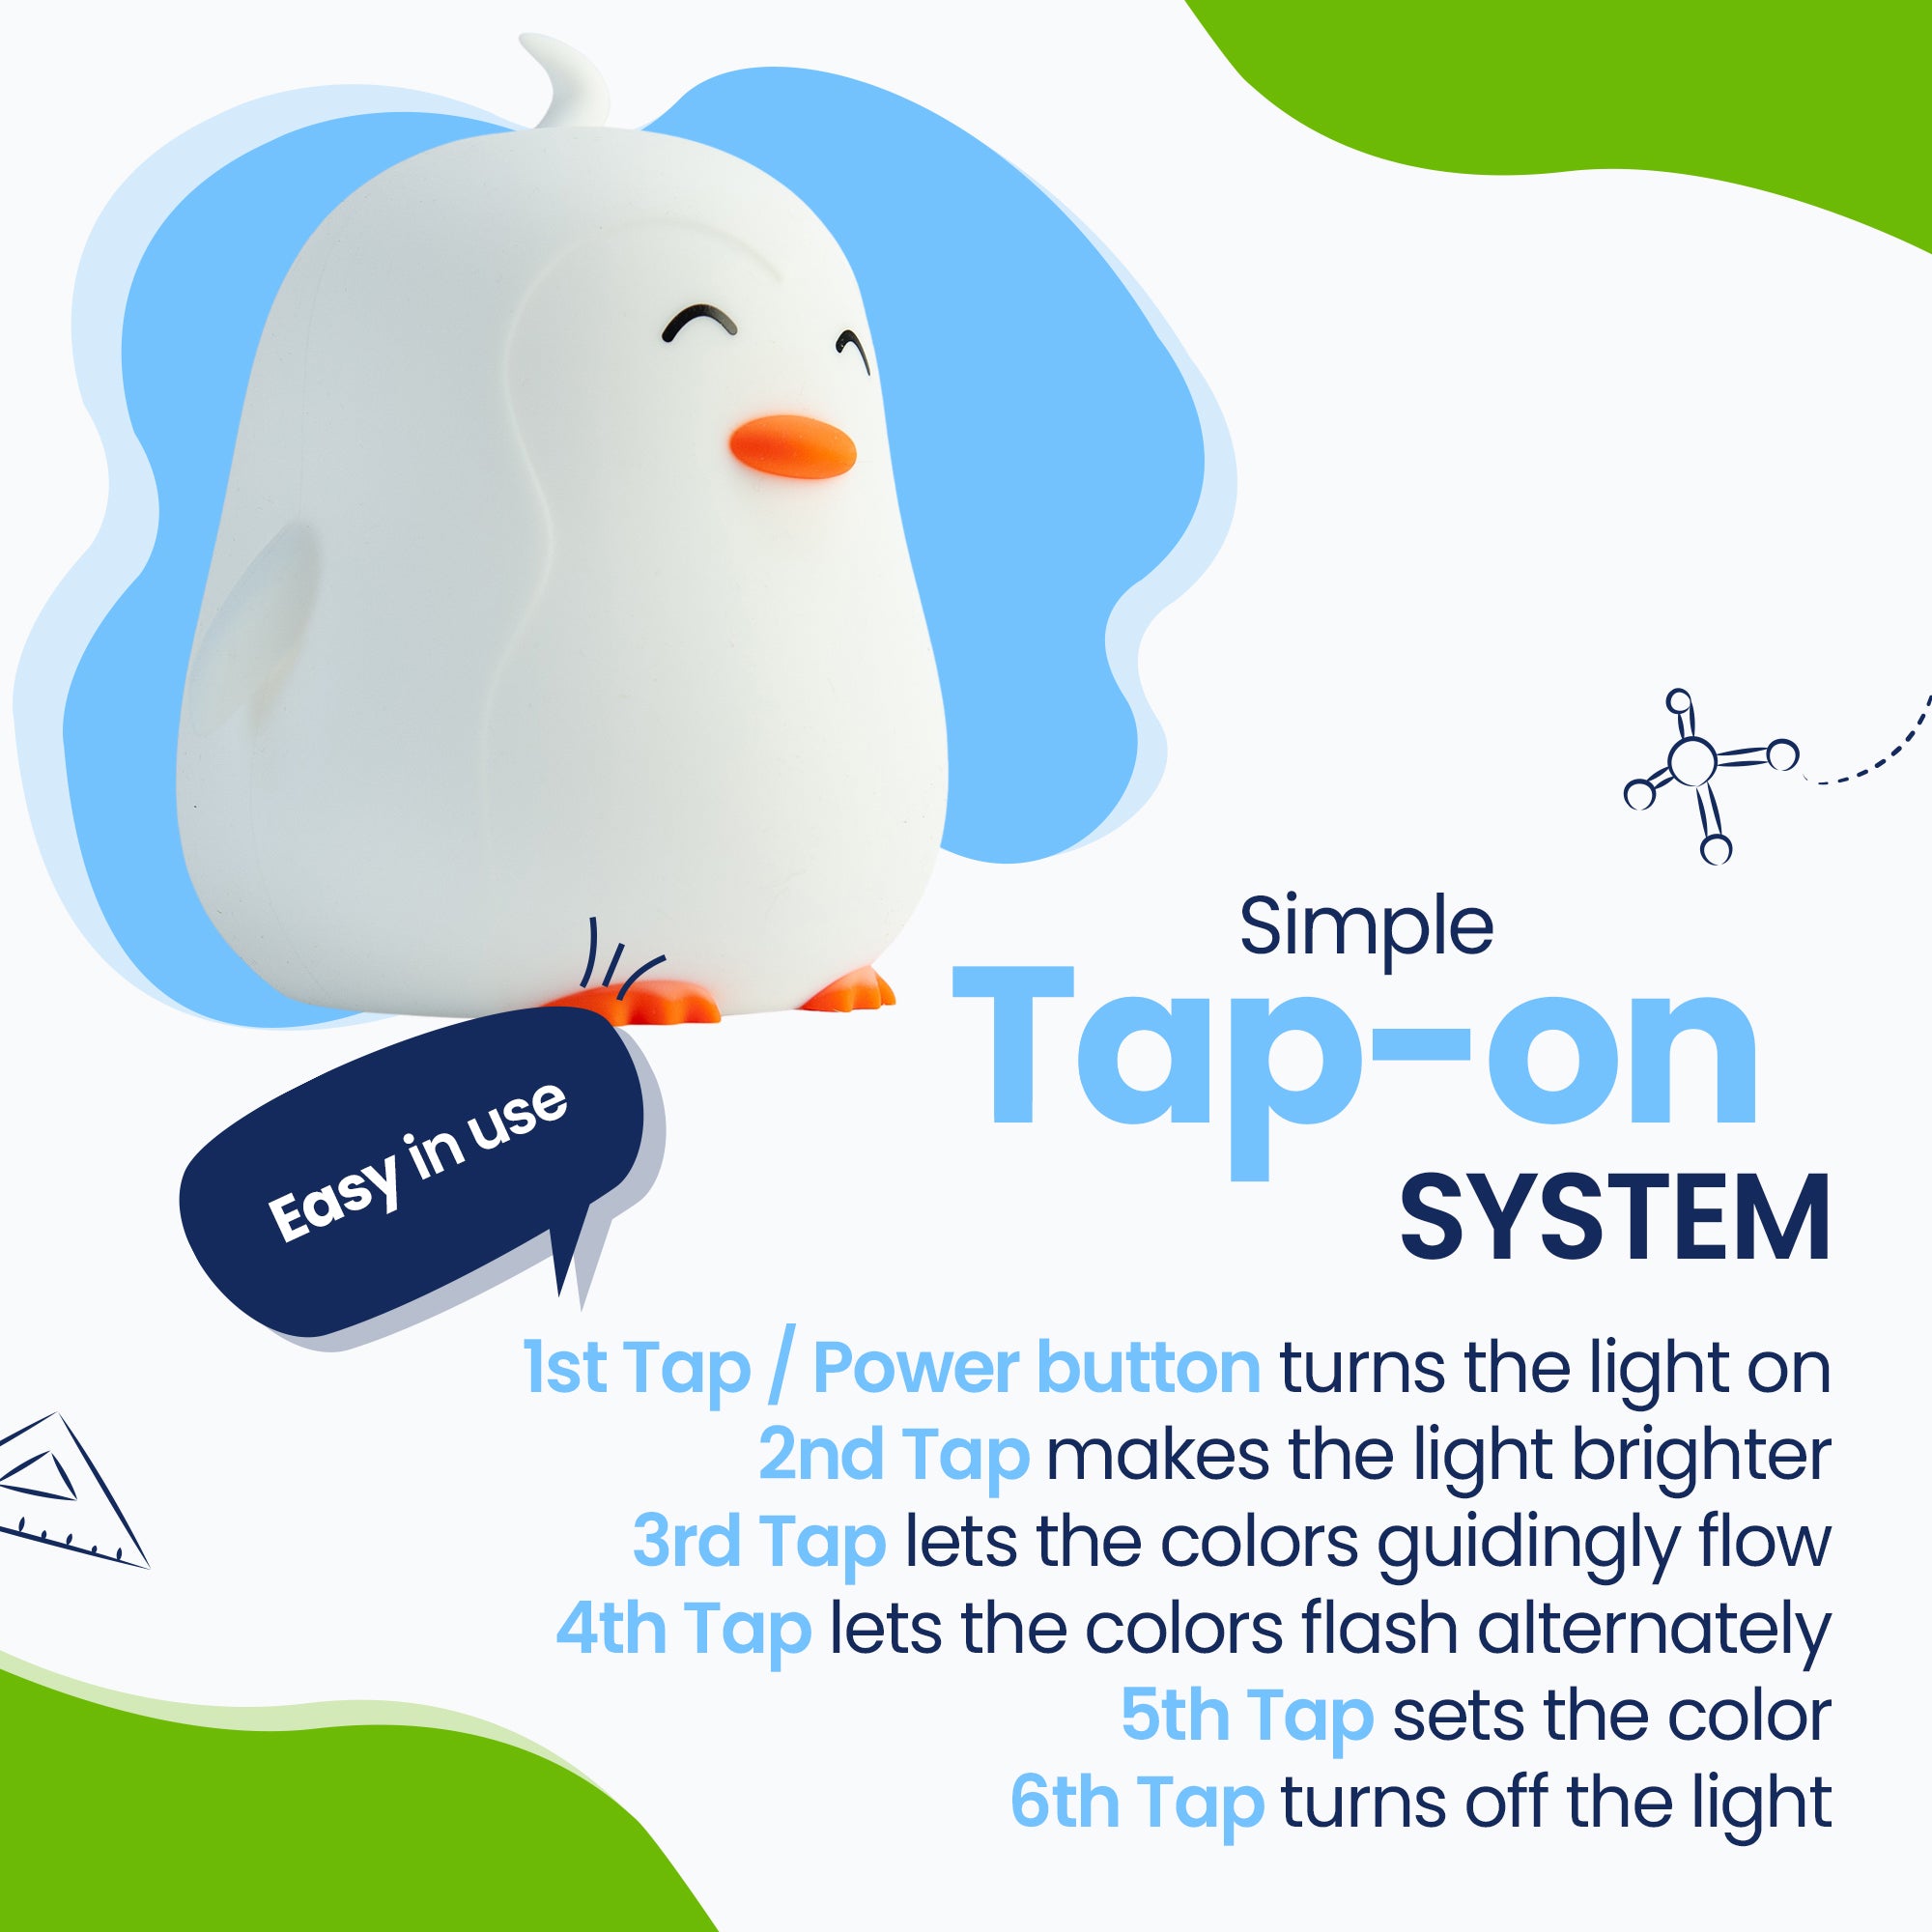 Simple Tap-on system - Easy to use - turn on the light - make the light brighter - let the colors flow - alternately flash colors - fix the color - turn off the color